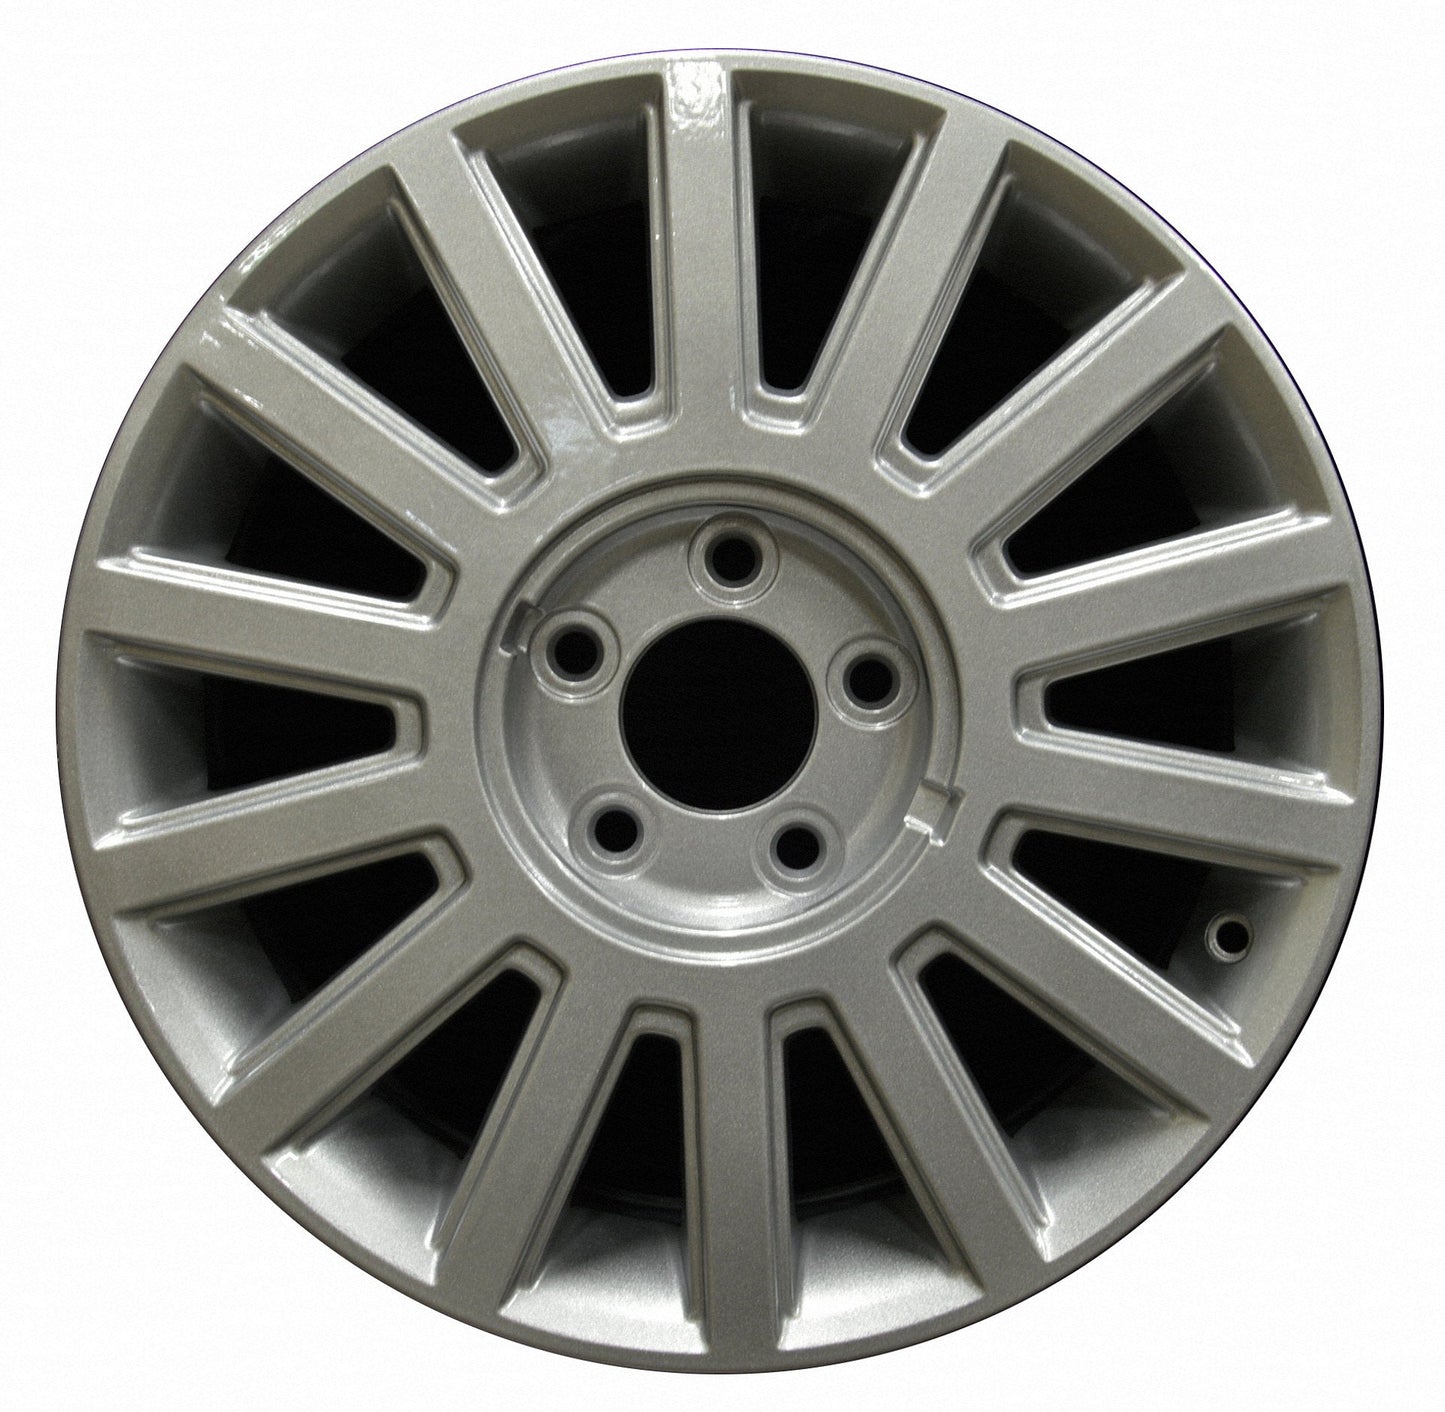 Lincoln Town Car  2003, 2004, 2005 Factory OEM Car Wheel Size 17x7 Alloy WAO.3504A.PS08.FF